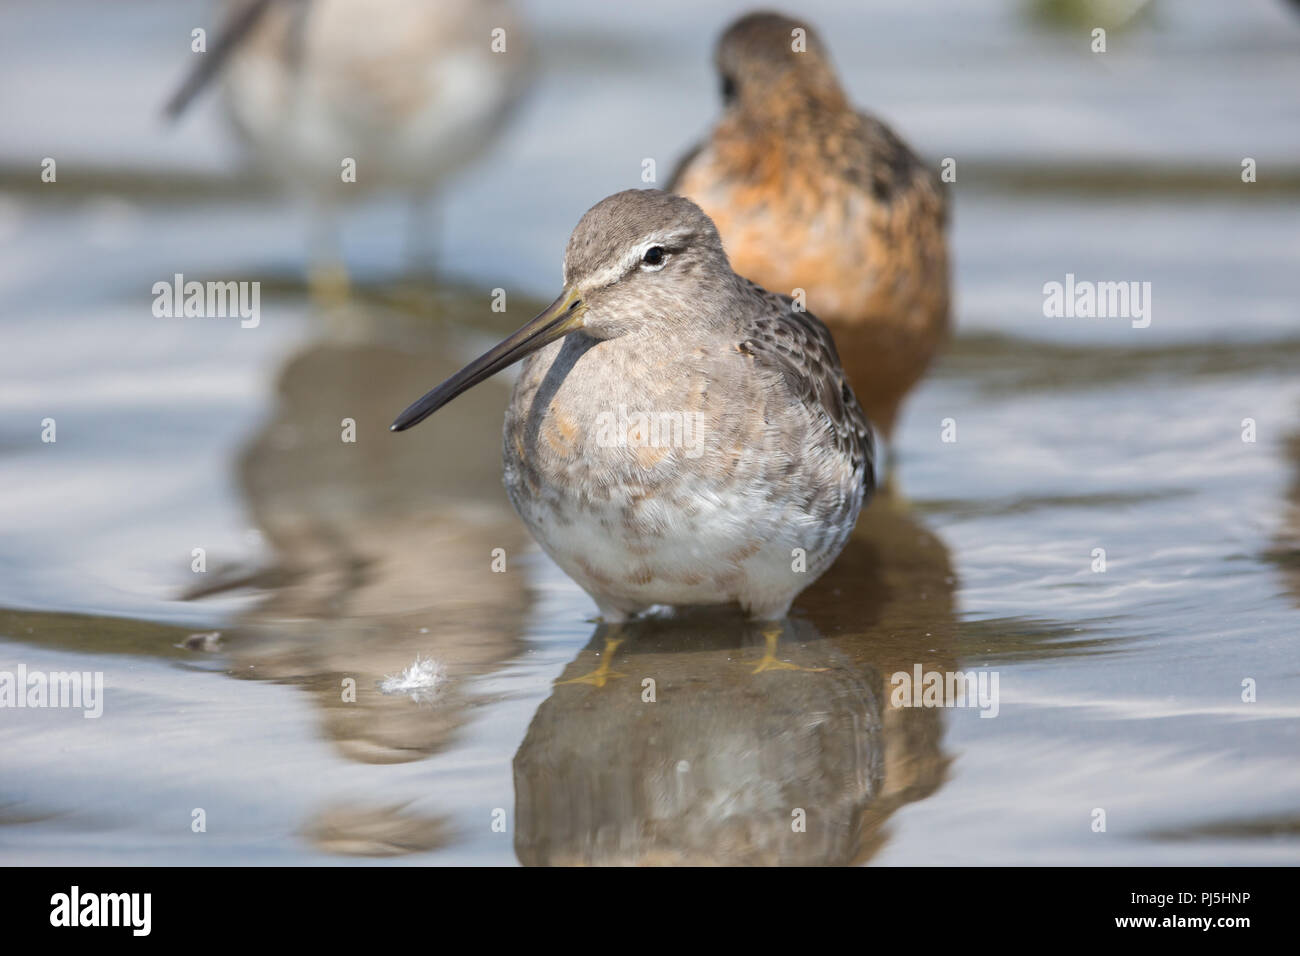 Long-billed dowitcher bird at Vancouver BC Canada Stock Photo